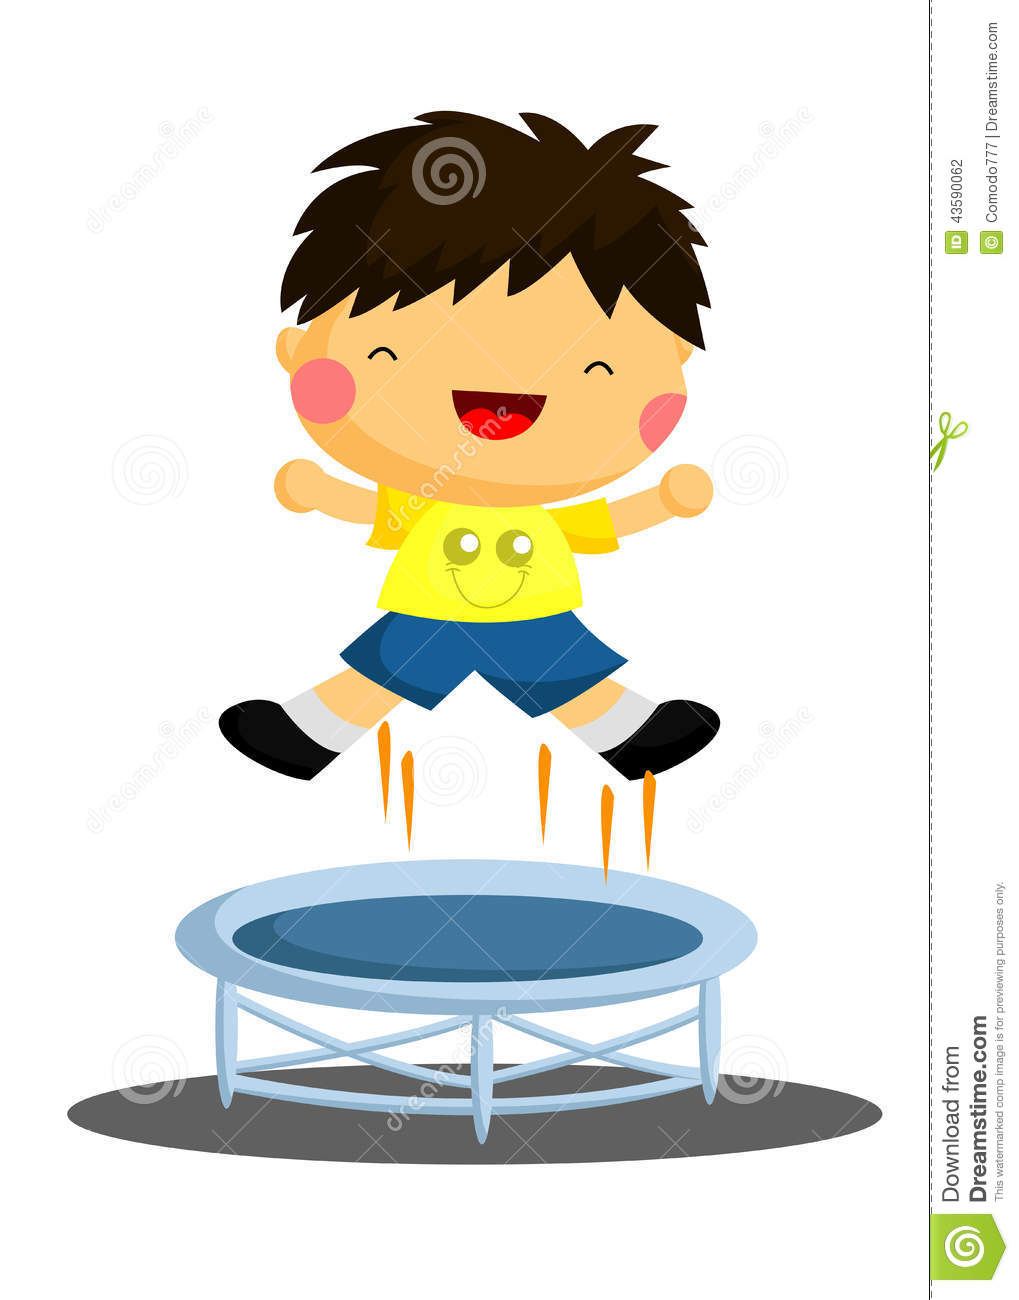 a jump on trampoline clipart